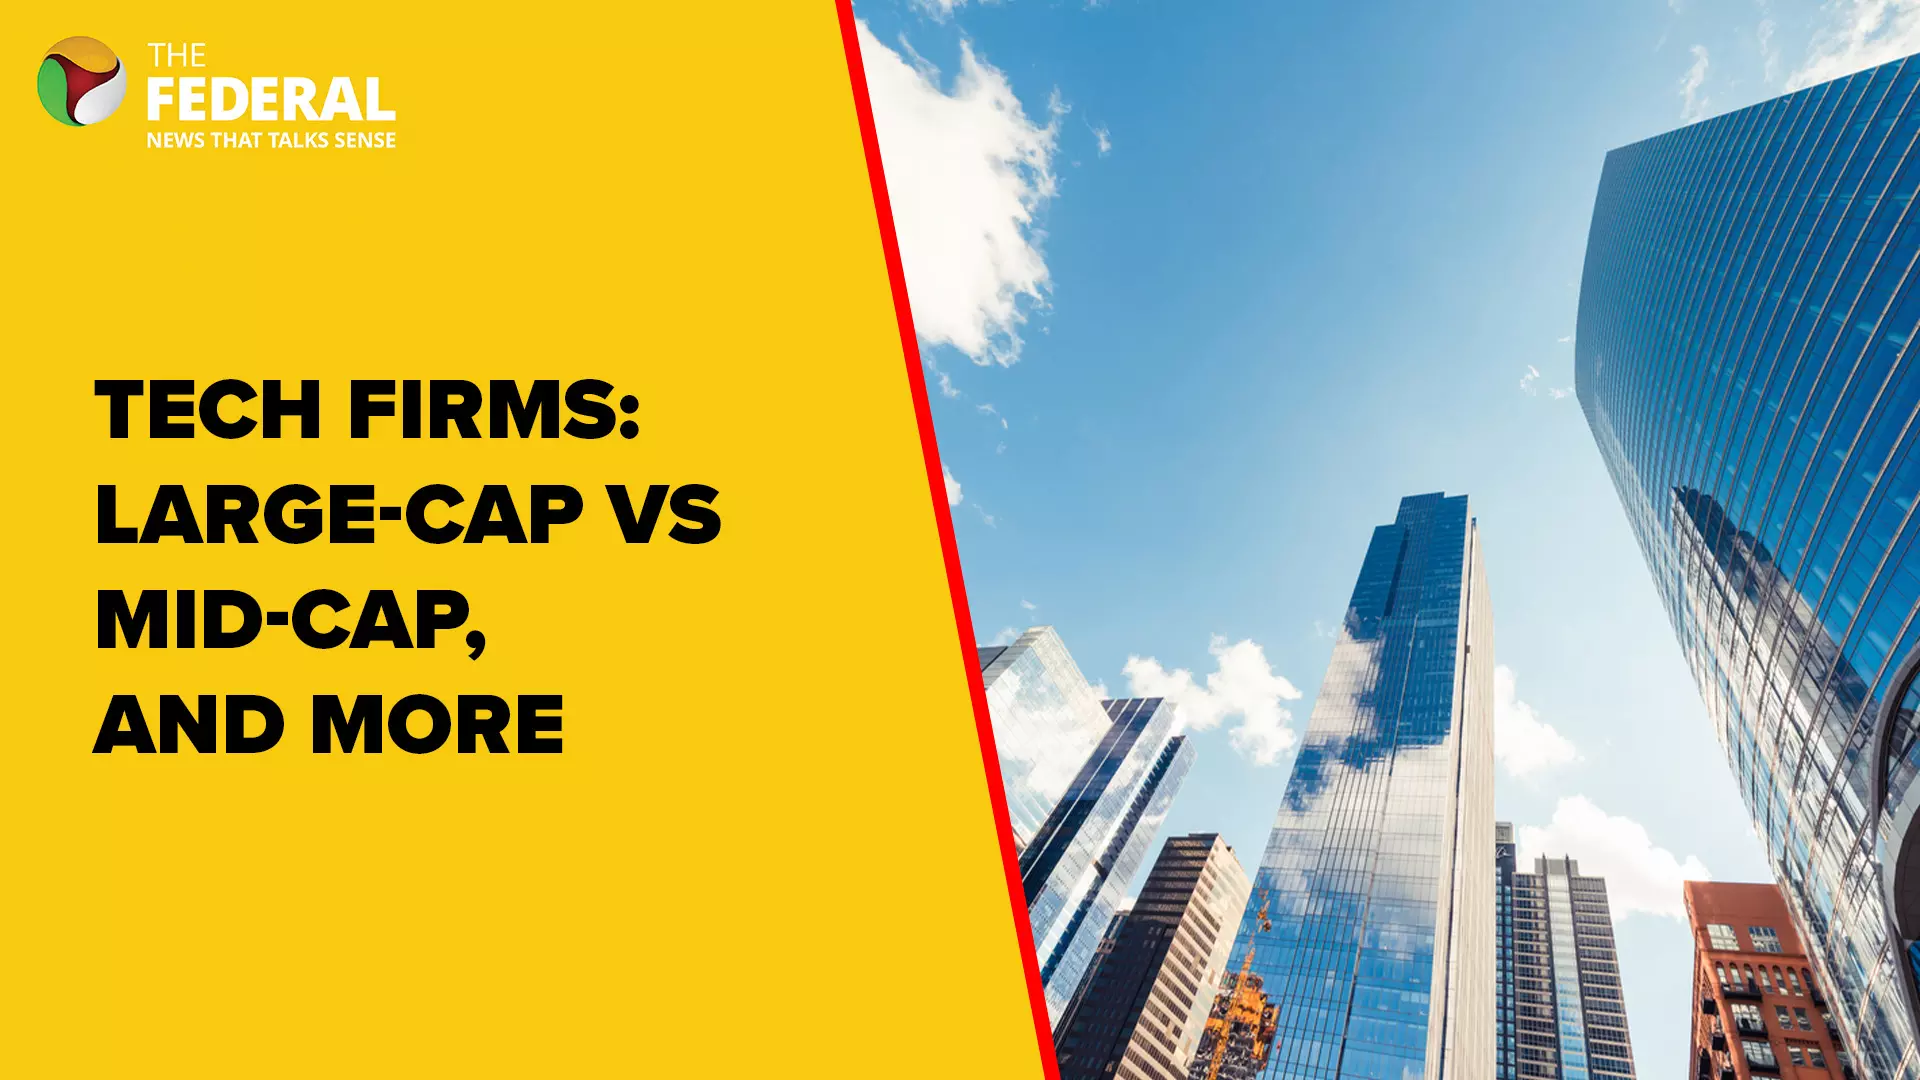 Tech firms: Large-cap vs mid-cap, and more